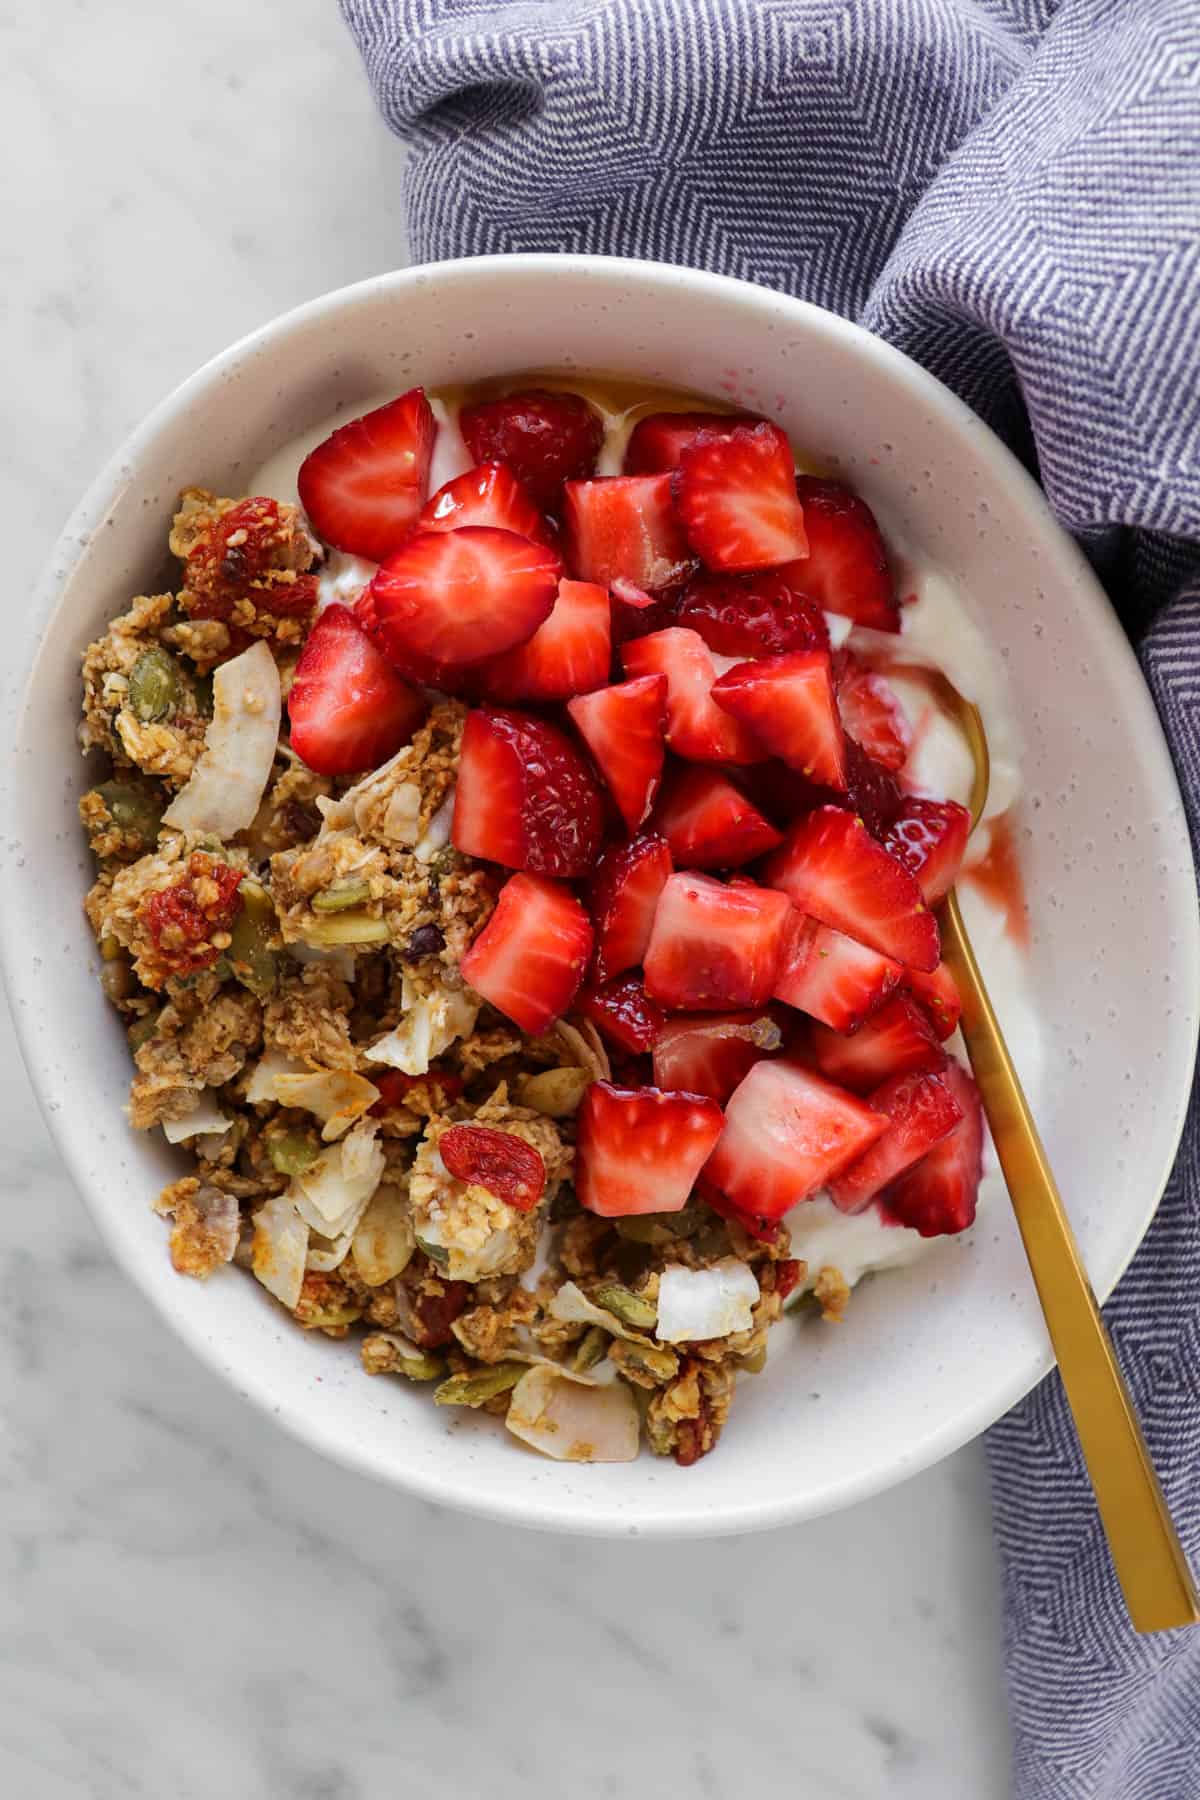 Yoghurt bowl with strawberries and granola.